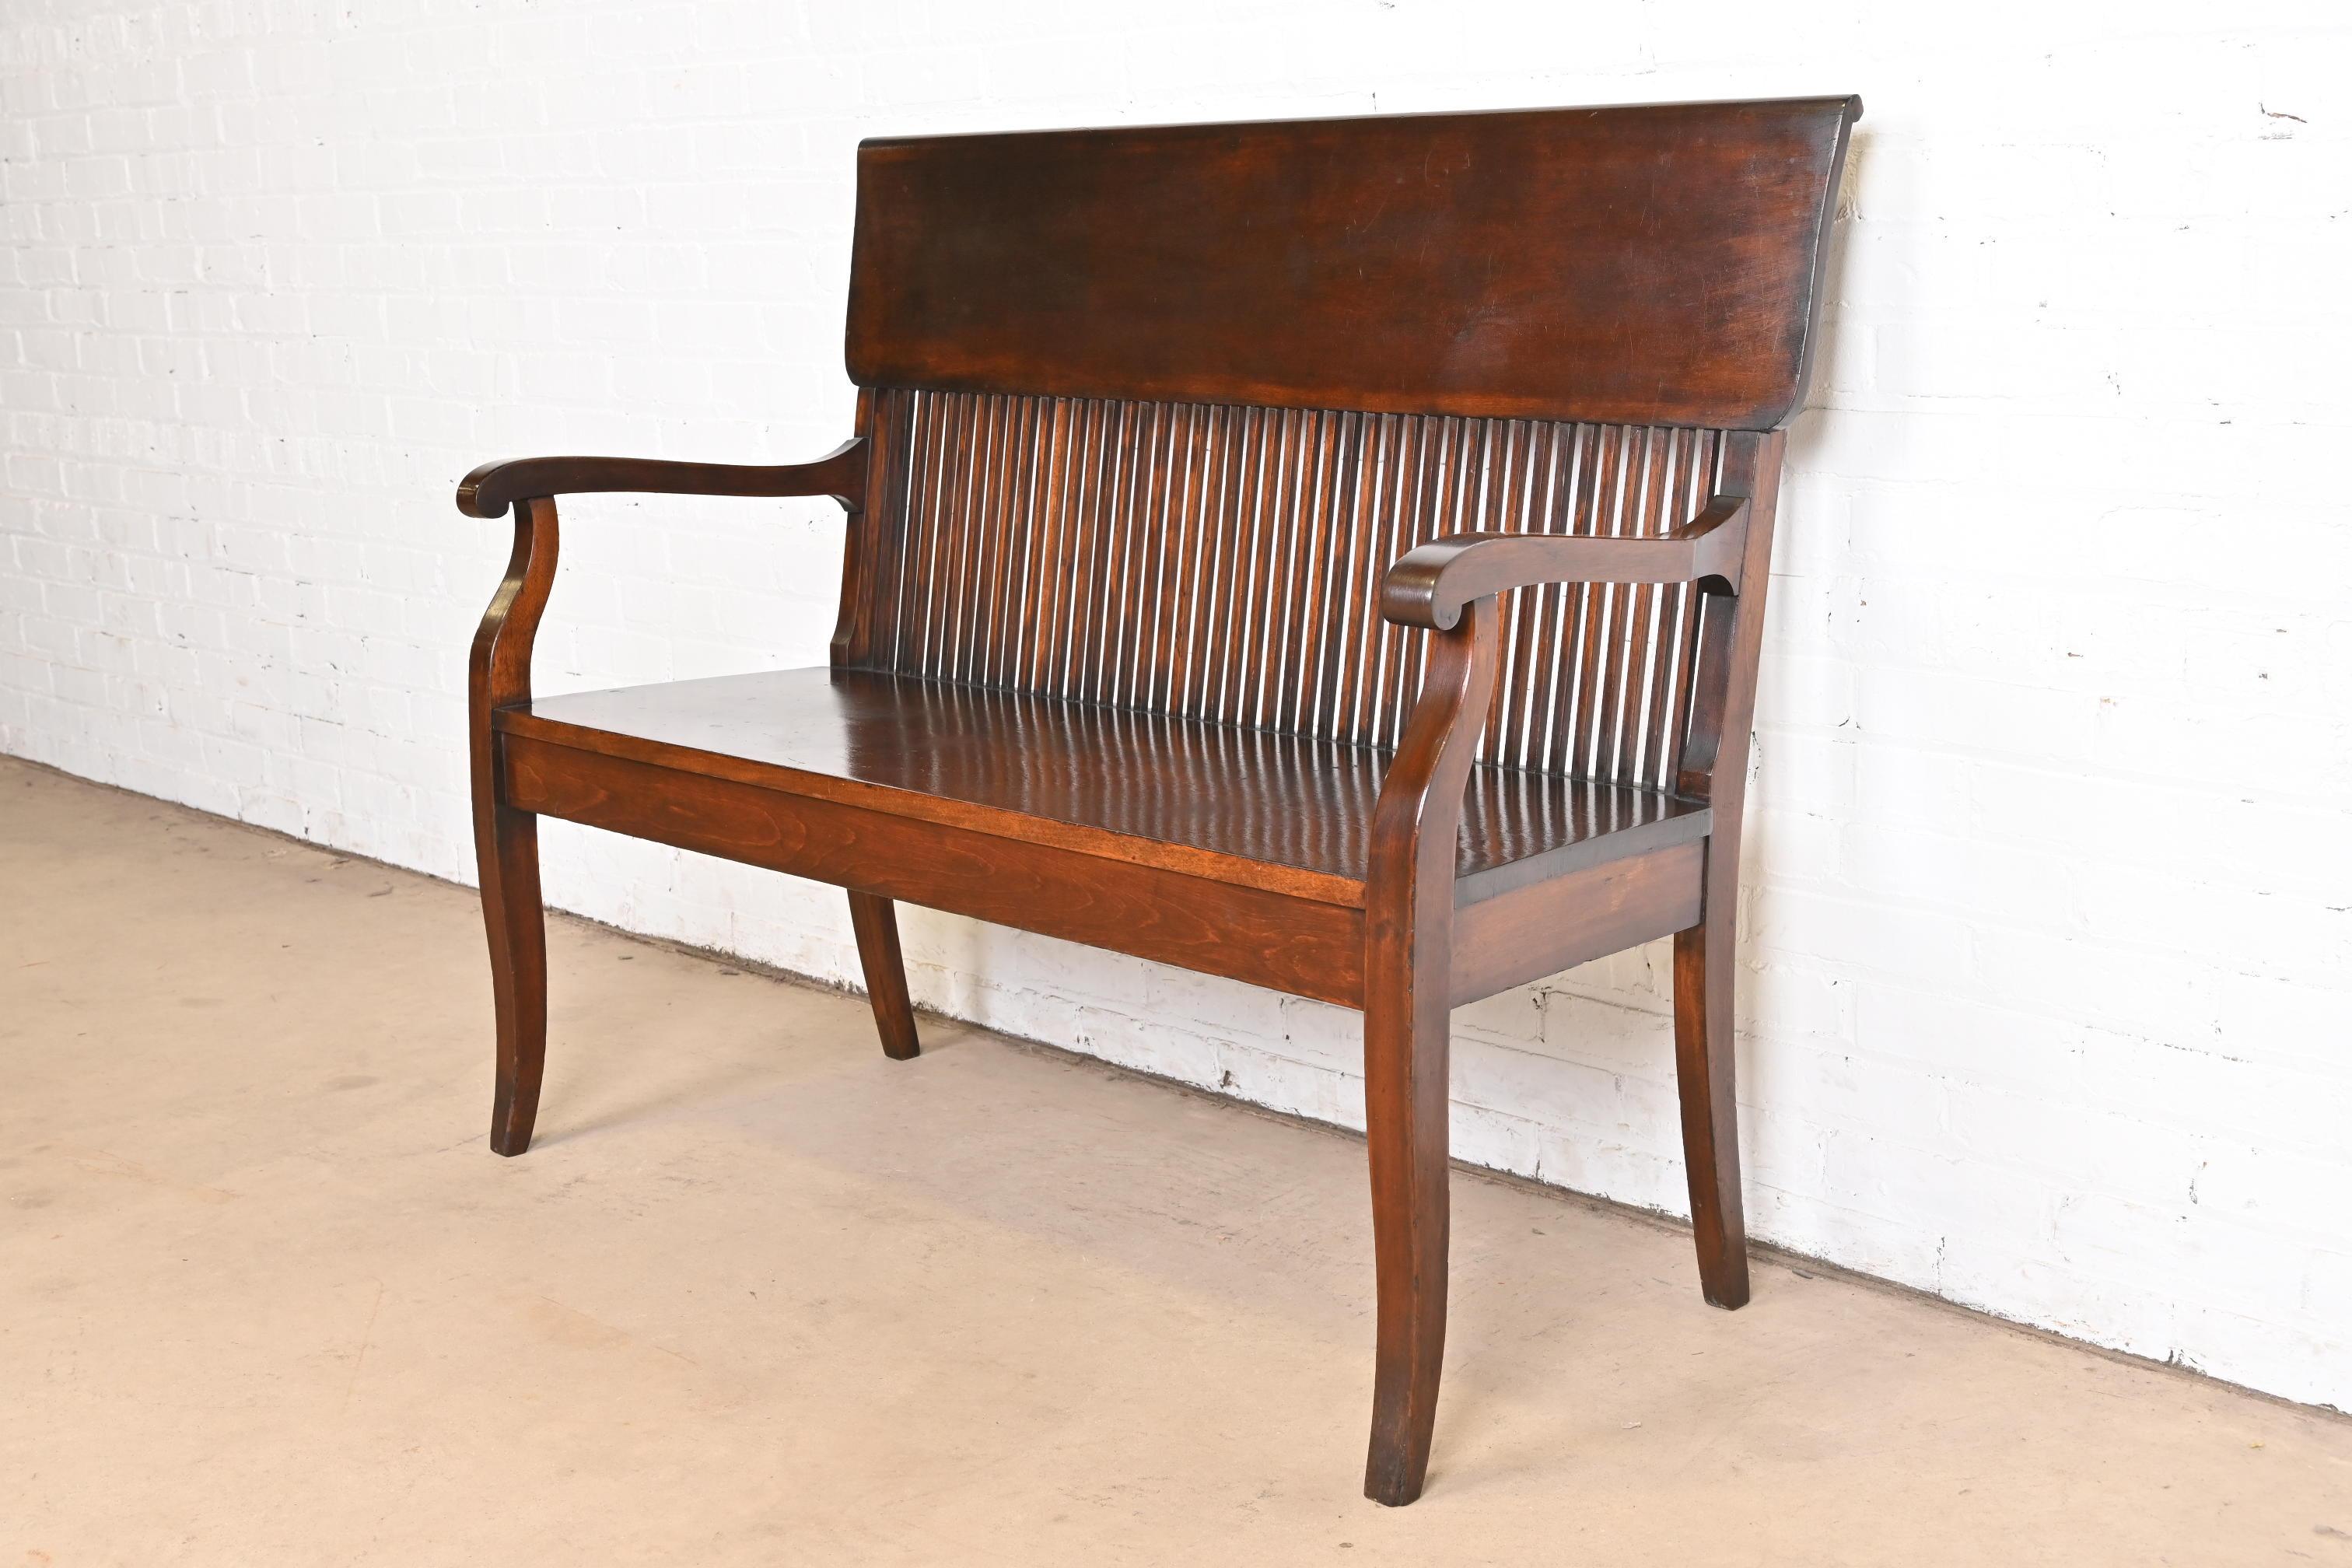 A beautiful Mission, Arts & Crafts, or Late Victorian mahogany banker or lawyer bench

USA, Circa 1900

Measures: 48.25